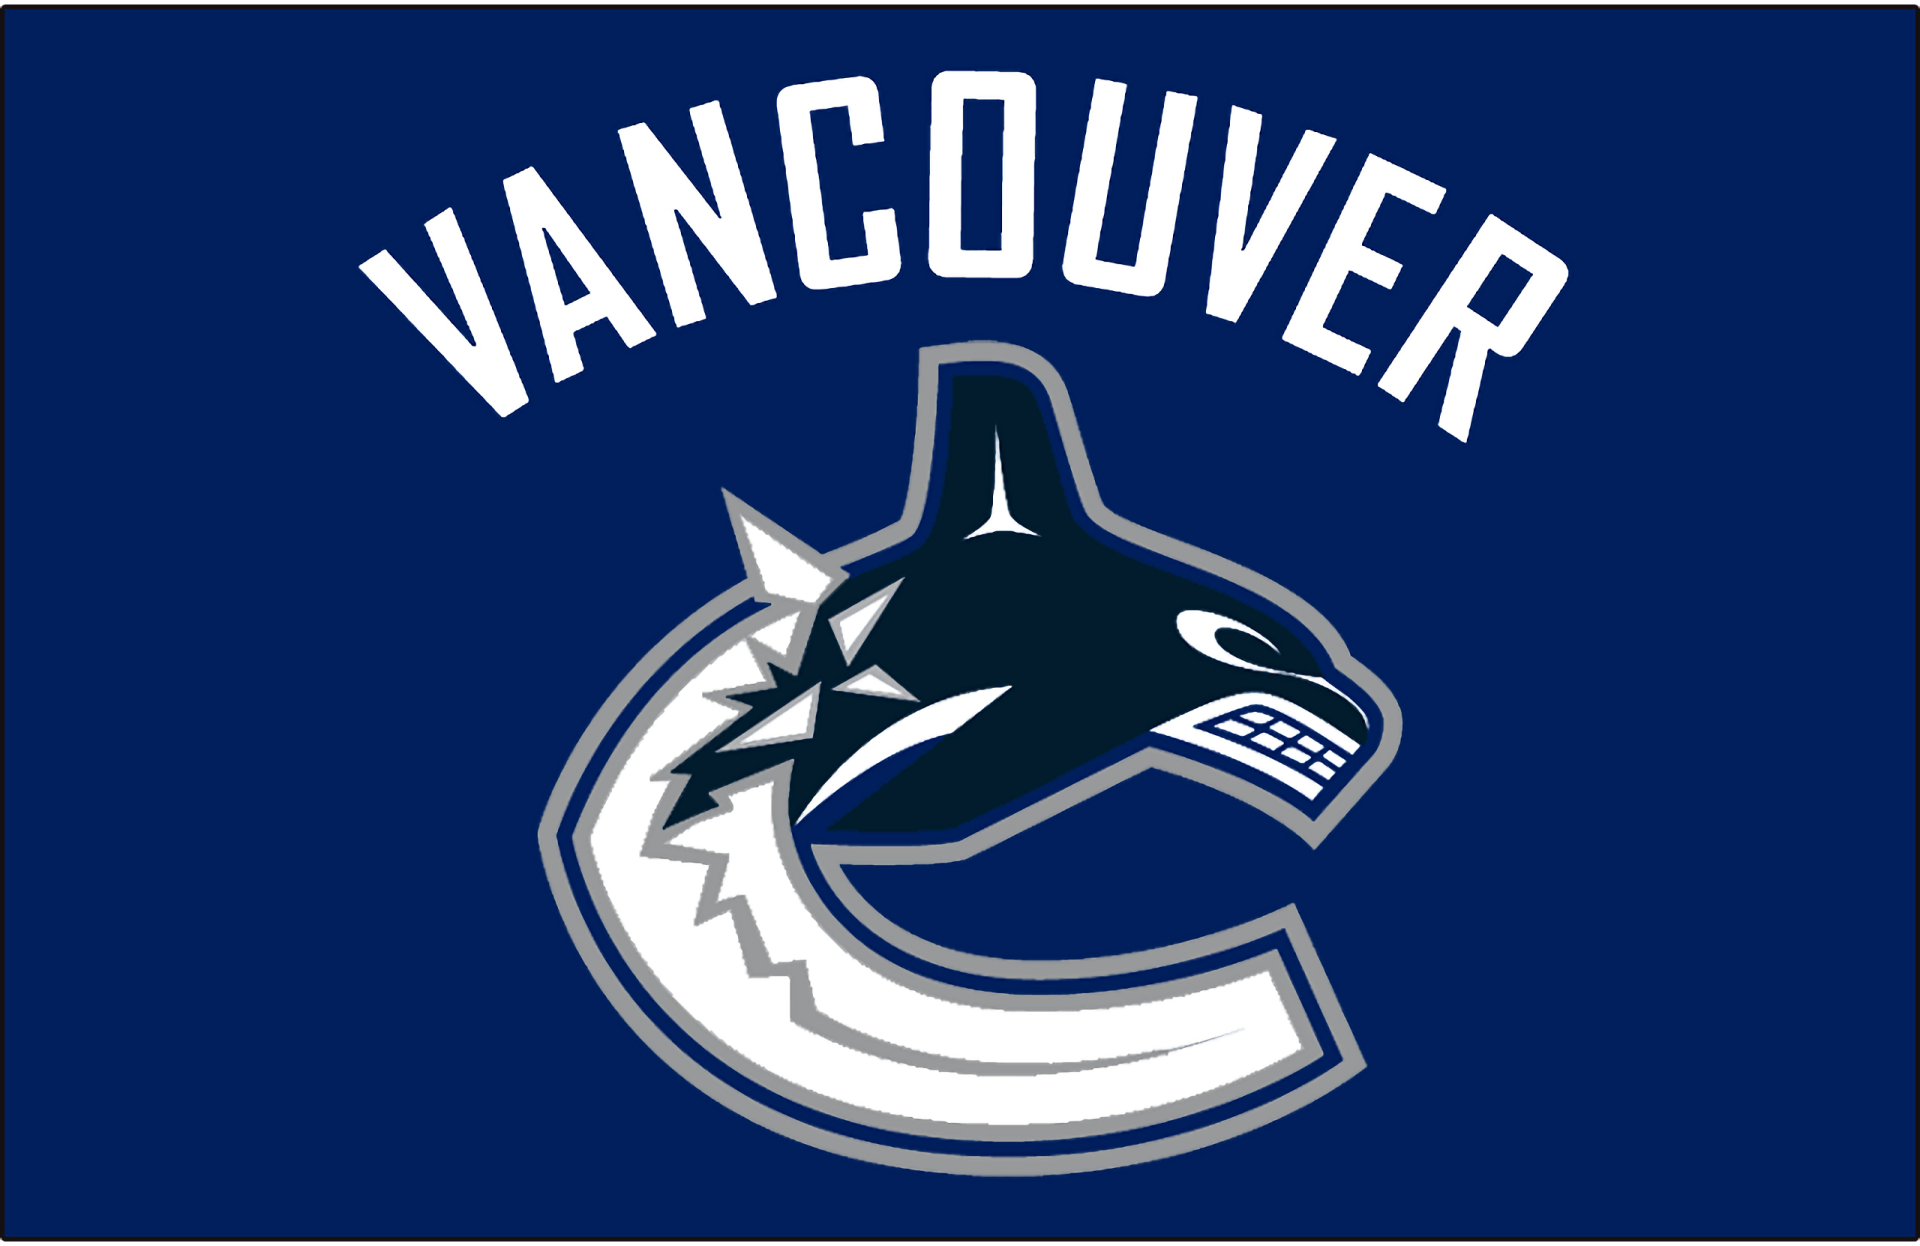 Vancouver Canucks Johnny Canuck iPhone 4 Wallpaper